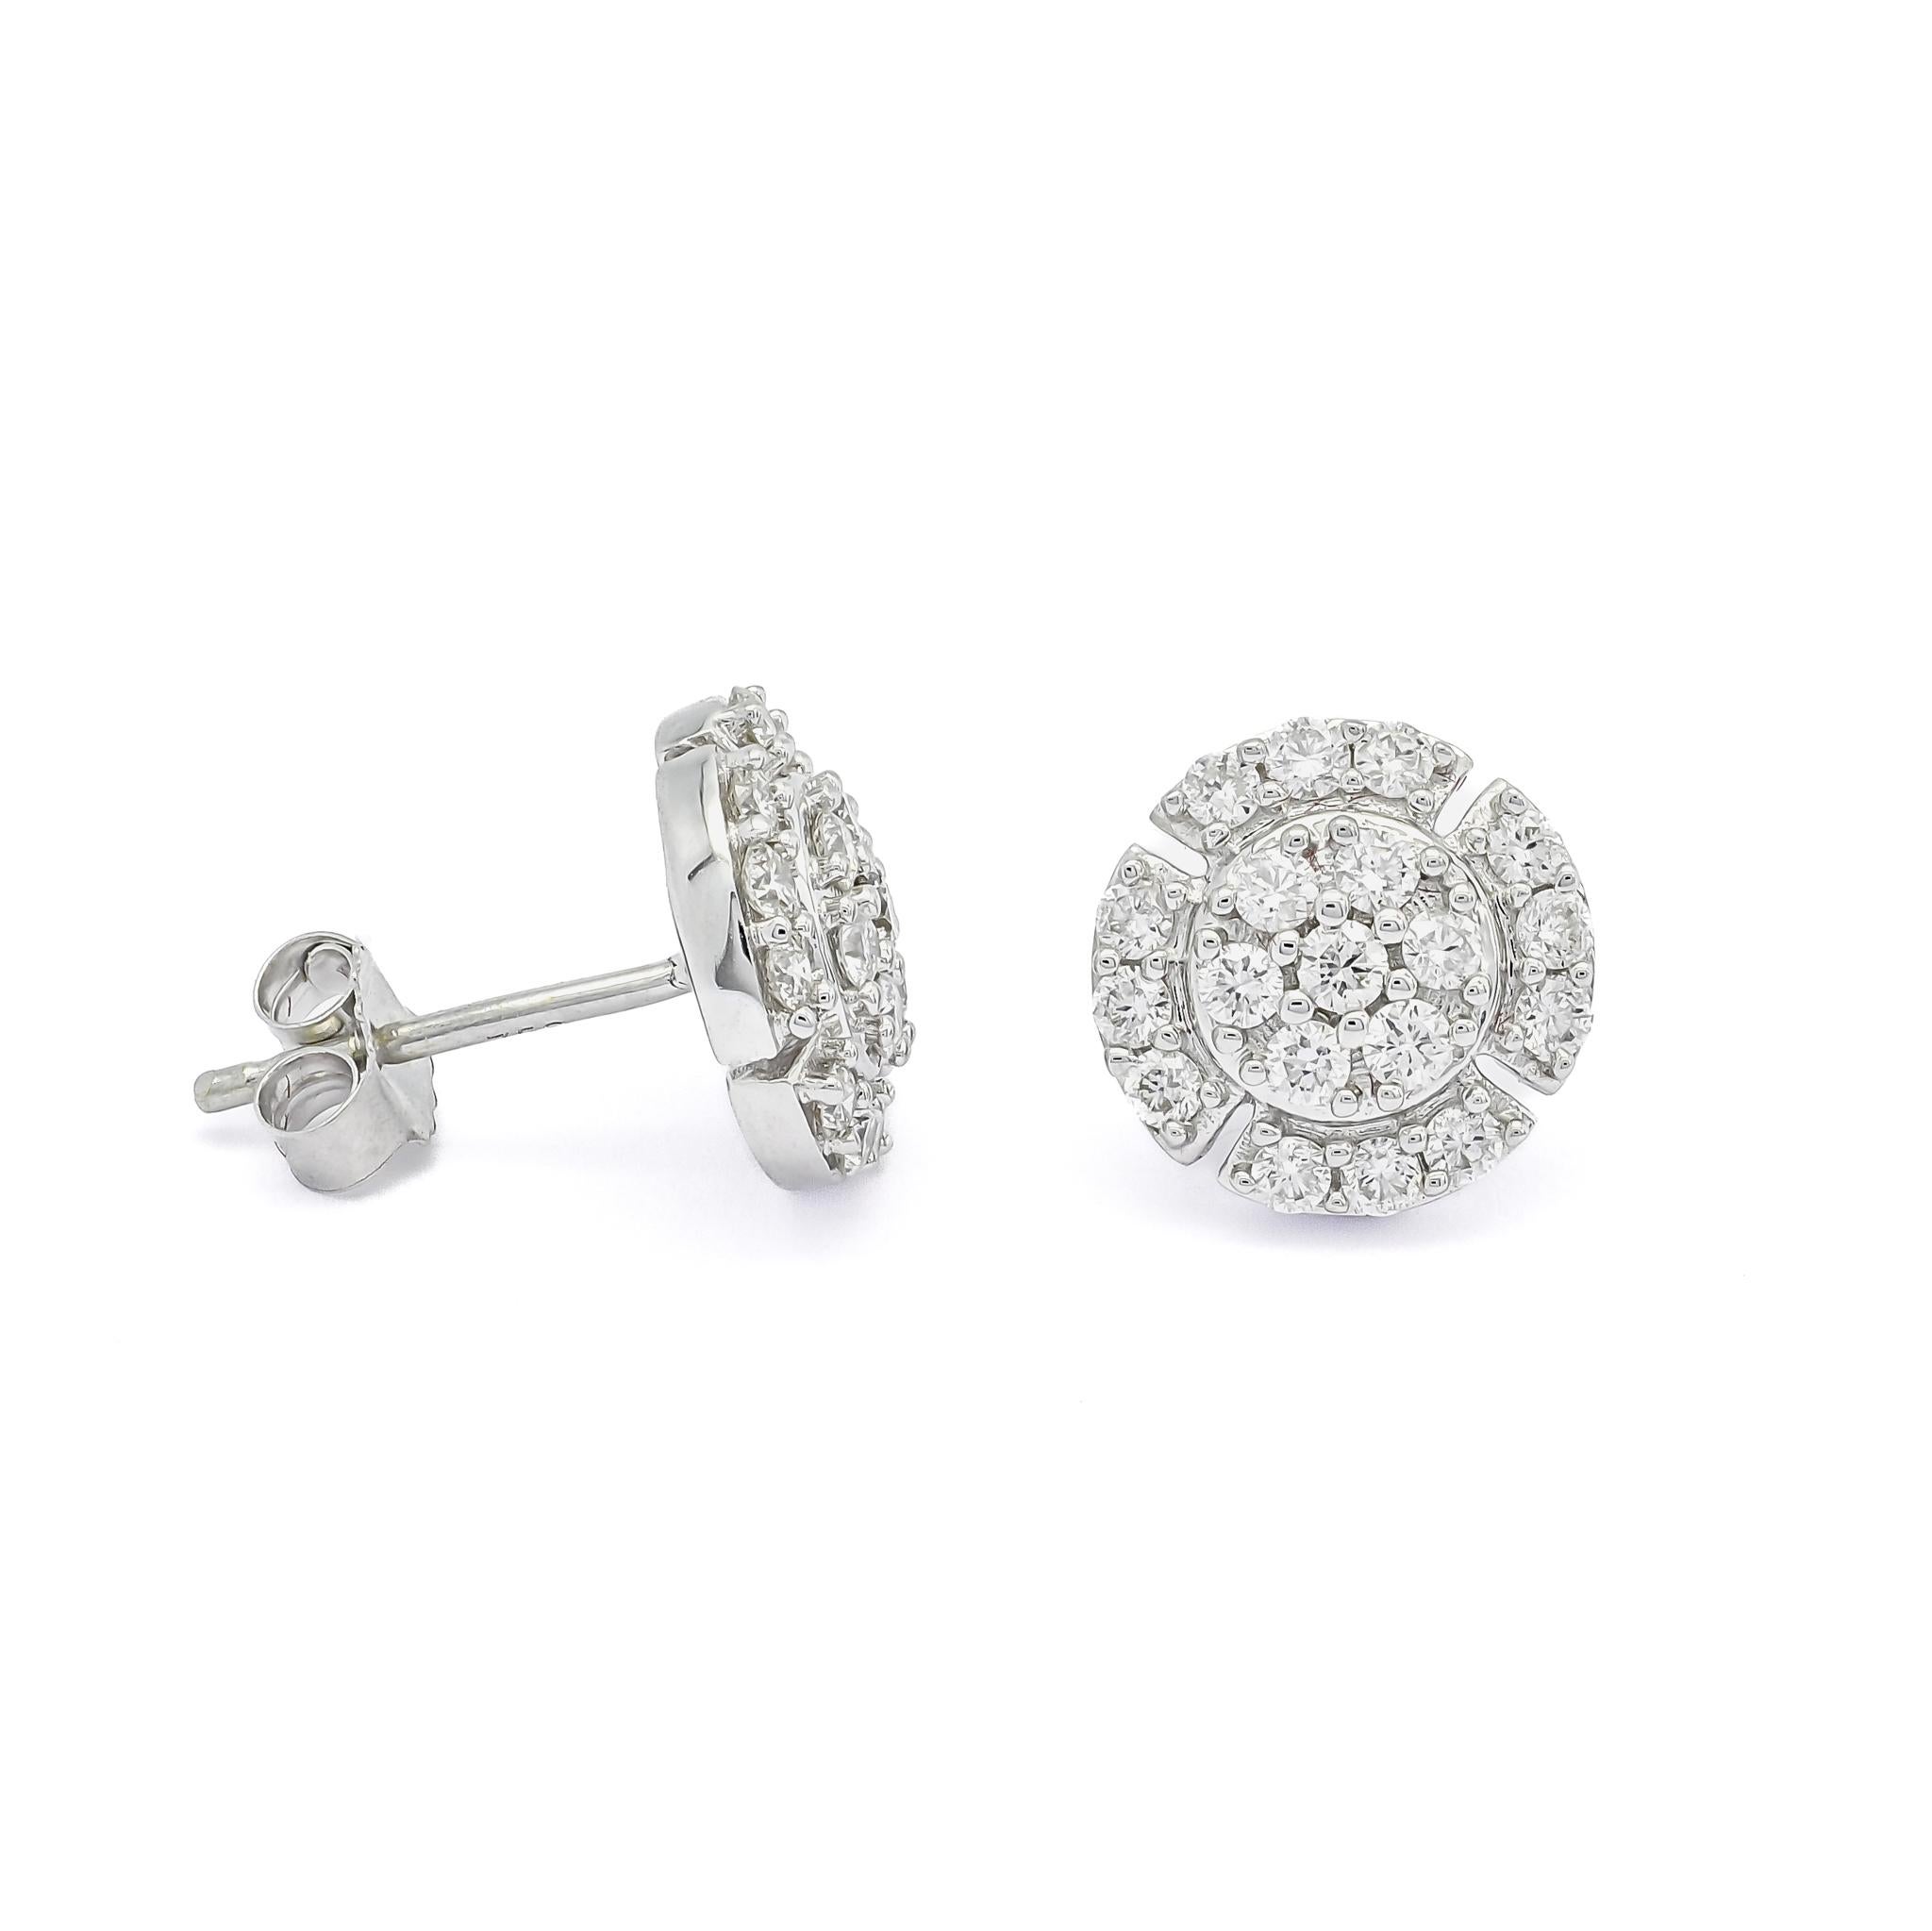 The enchanting halo design surrounding the small round cluster  adds an ethereal dimension to these earrings. Nestled at the heart of these earrings, a captivating flower-shaped cluster of diamonds adds a breathtaking touch of nature-inspired